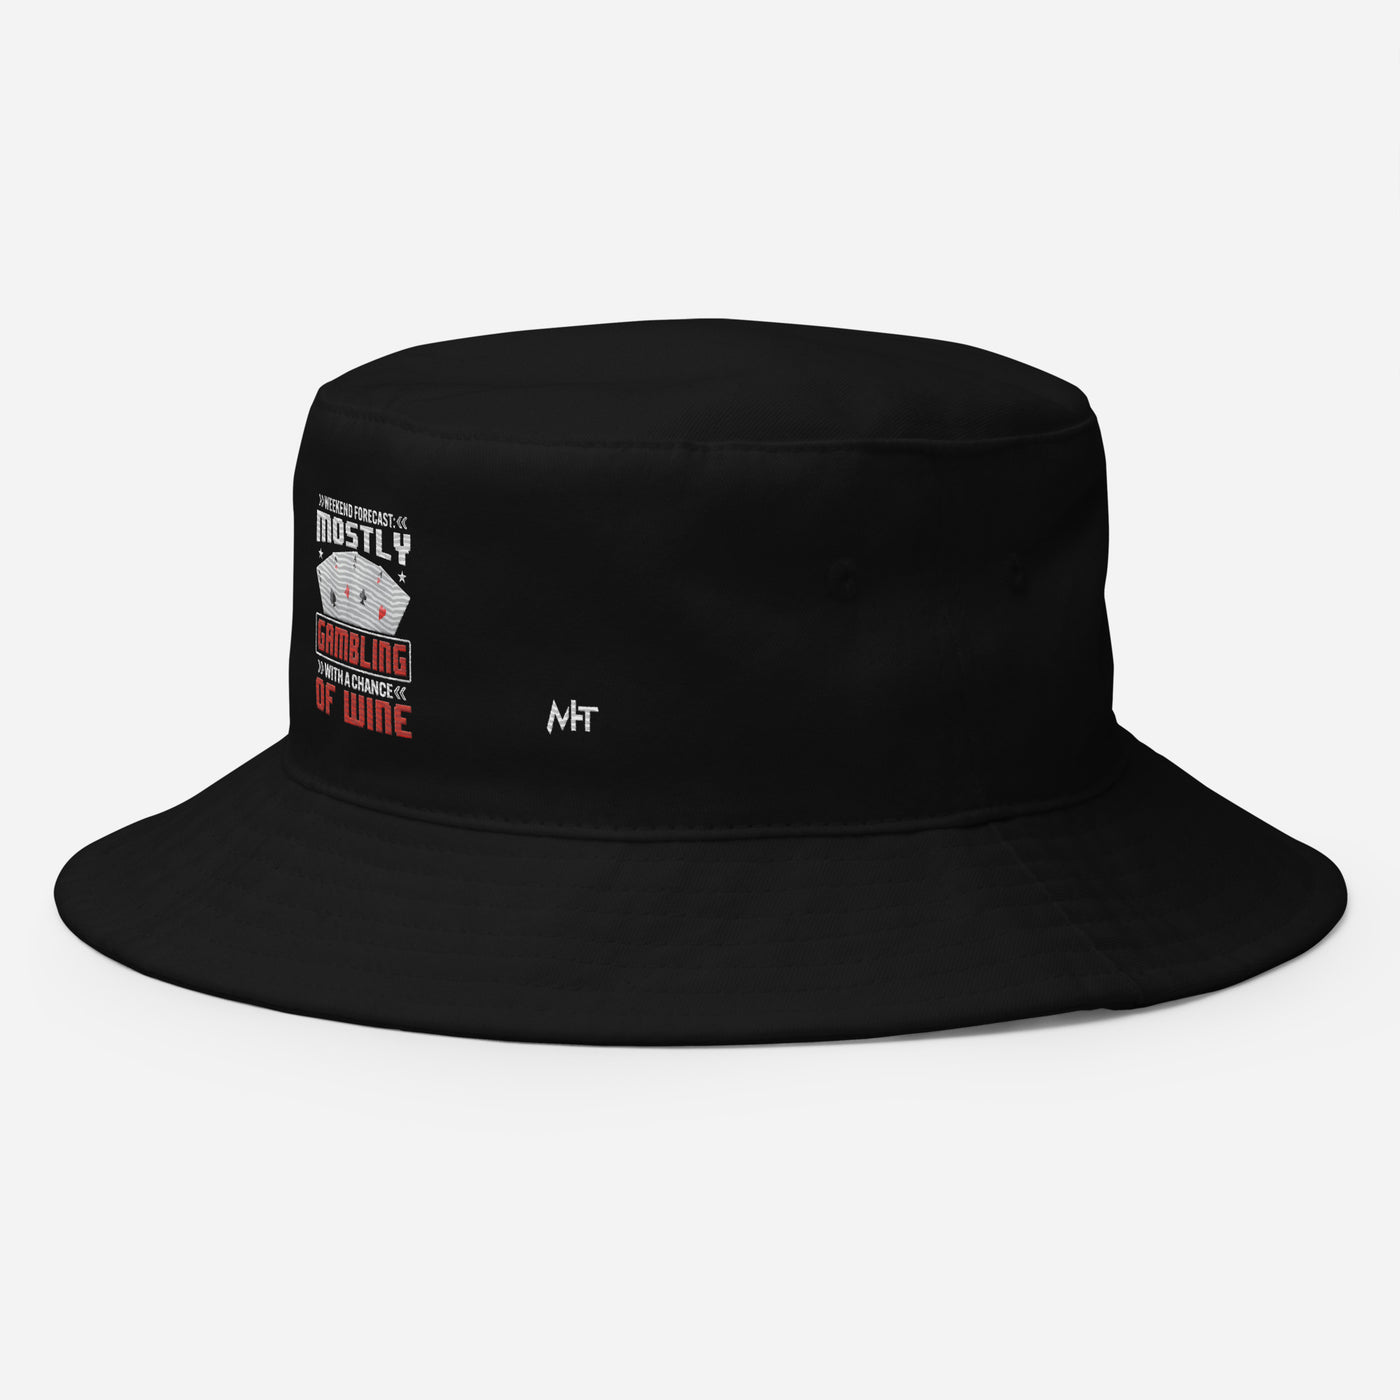 Weekend Forecast Mostly Gambling With a Chance of Wine - Bucket Hat